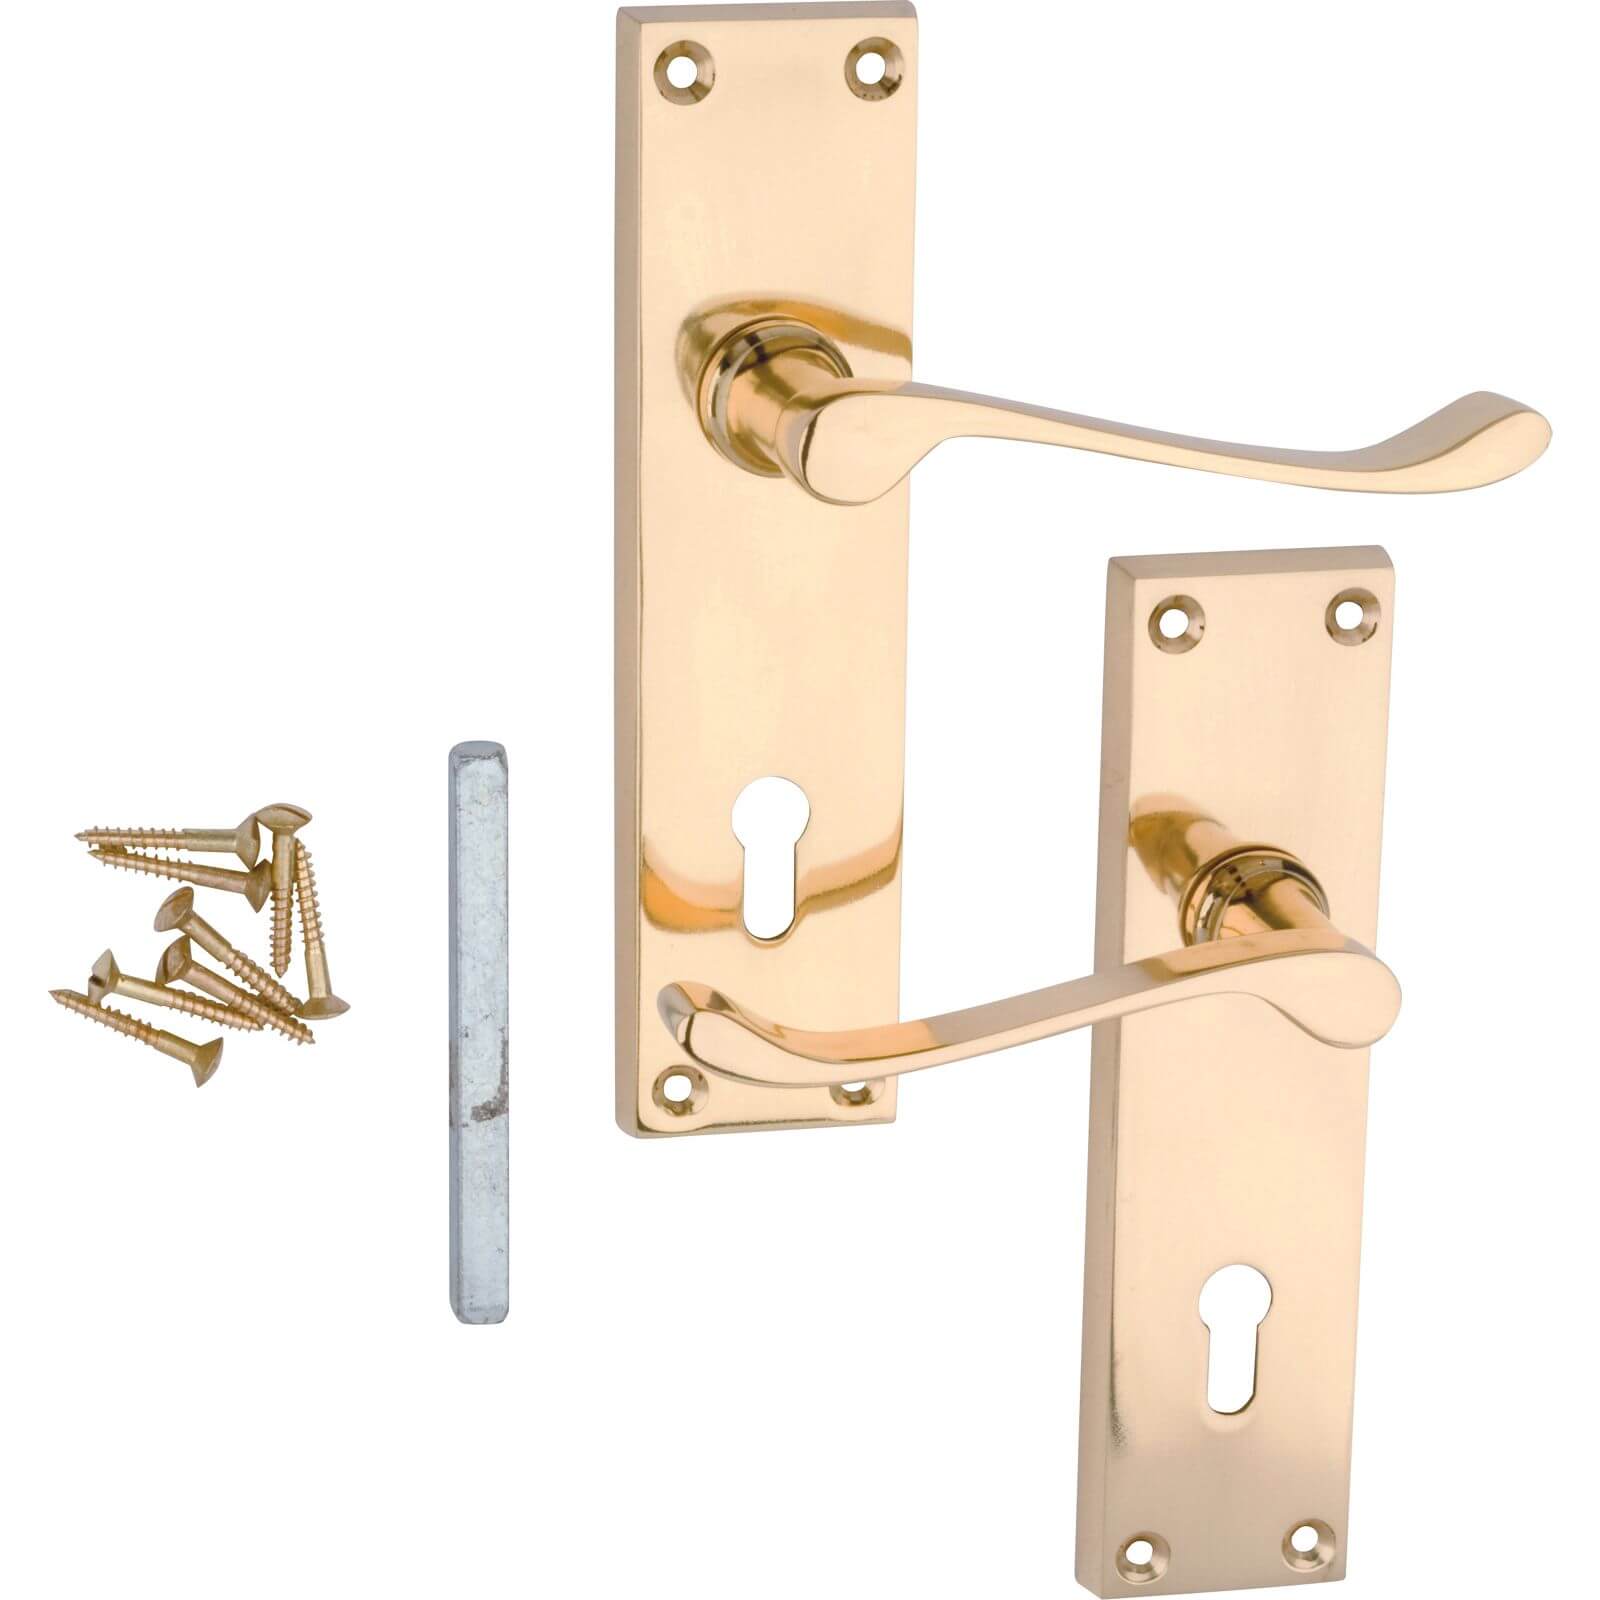 Victorian Scroll Lever Door Lock - Polished Brass - 1 Pair